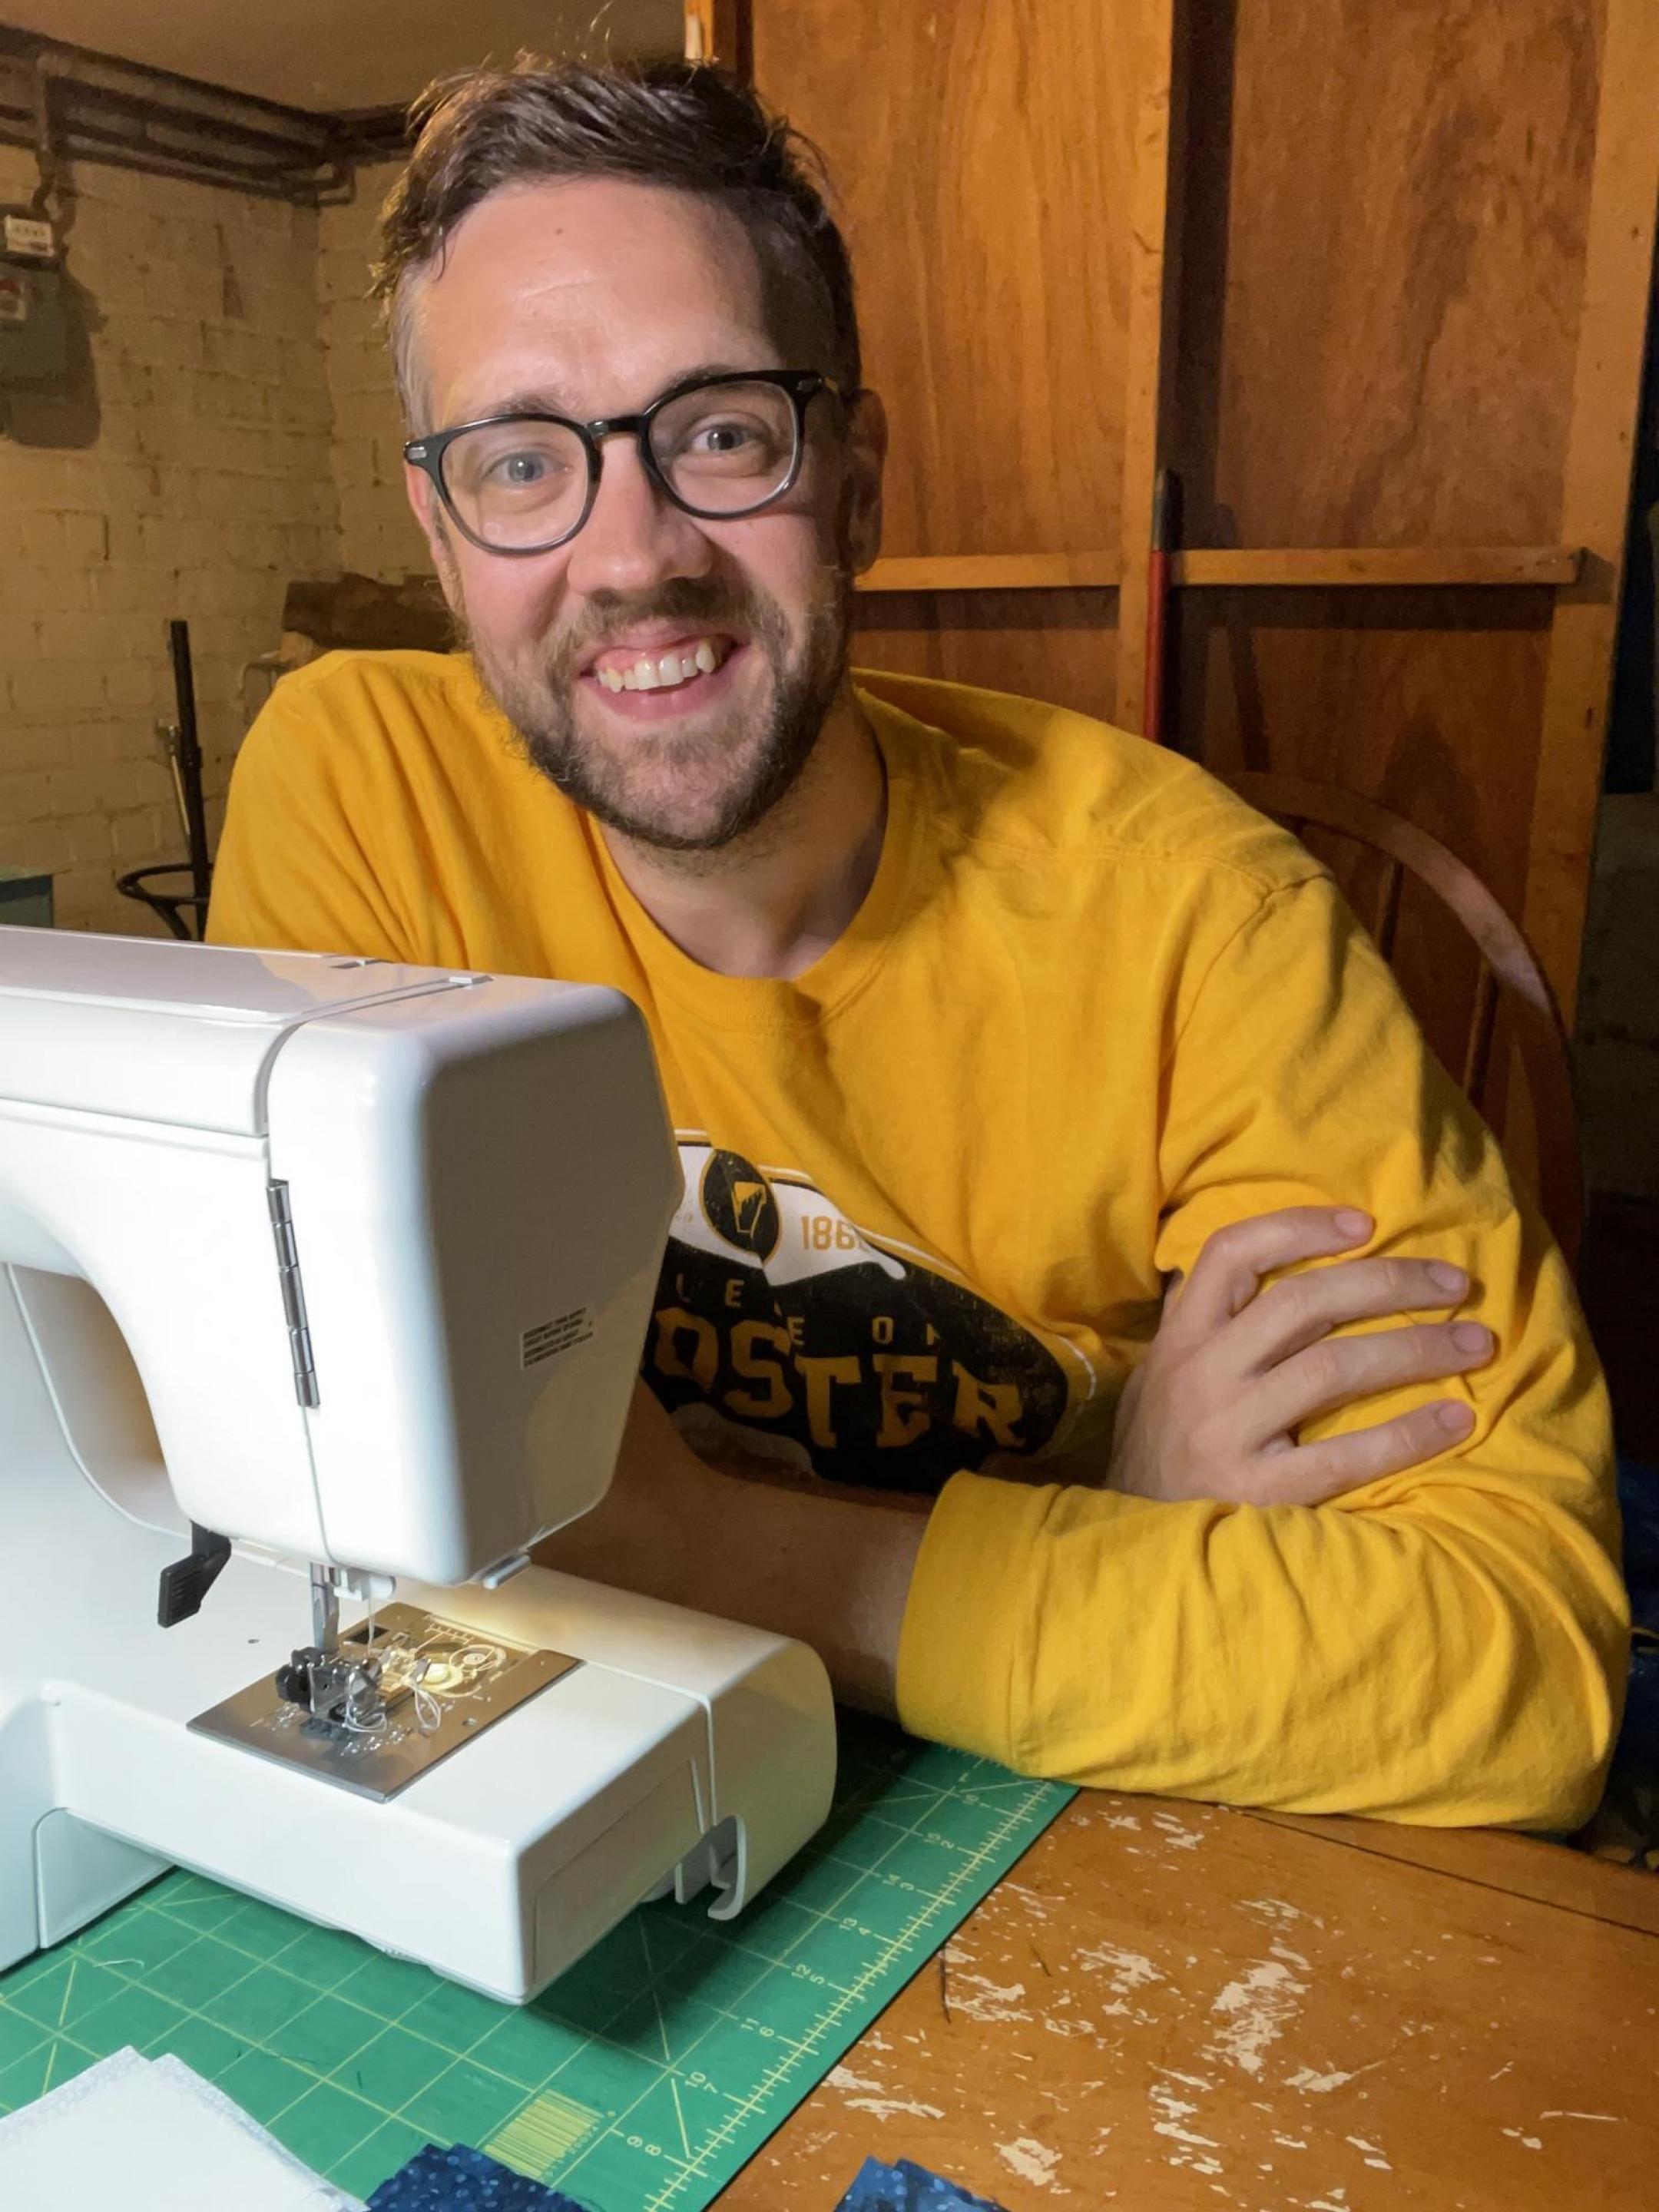 Paul smiling for a photo by his sewing machine